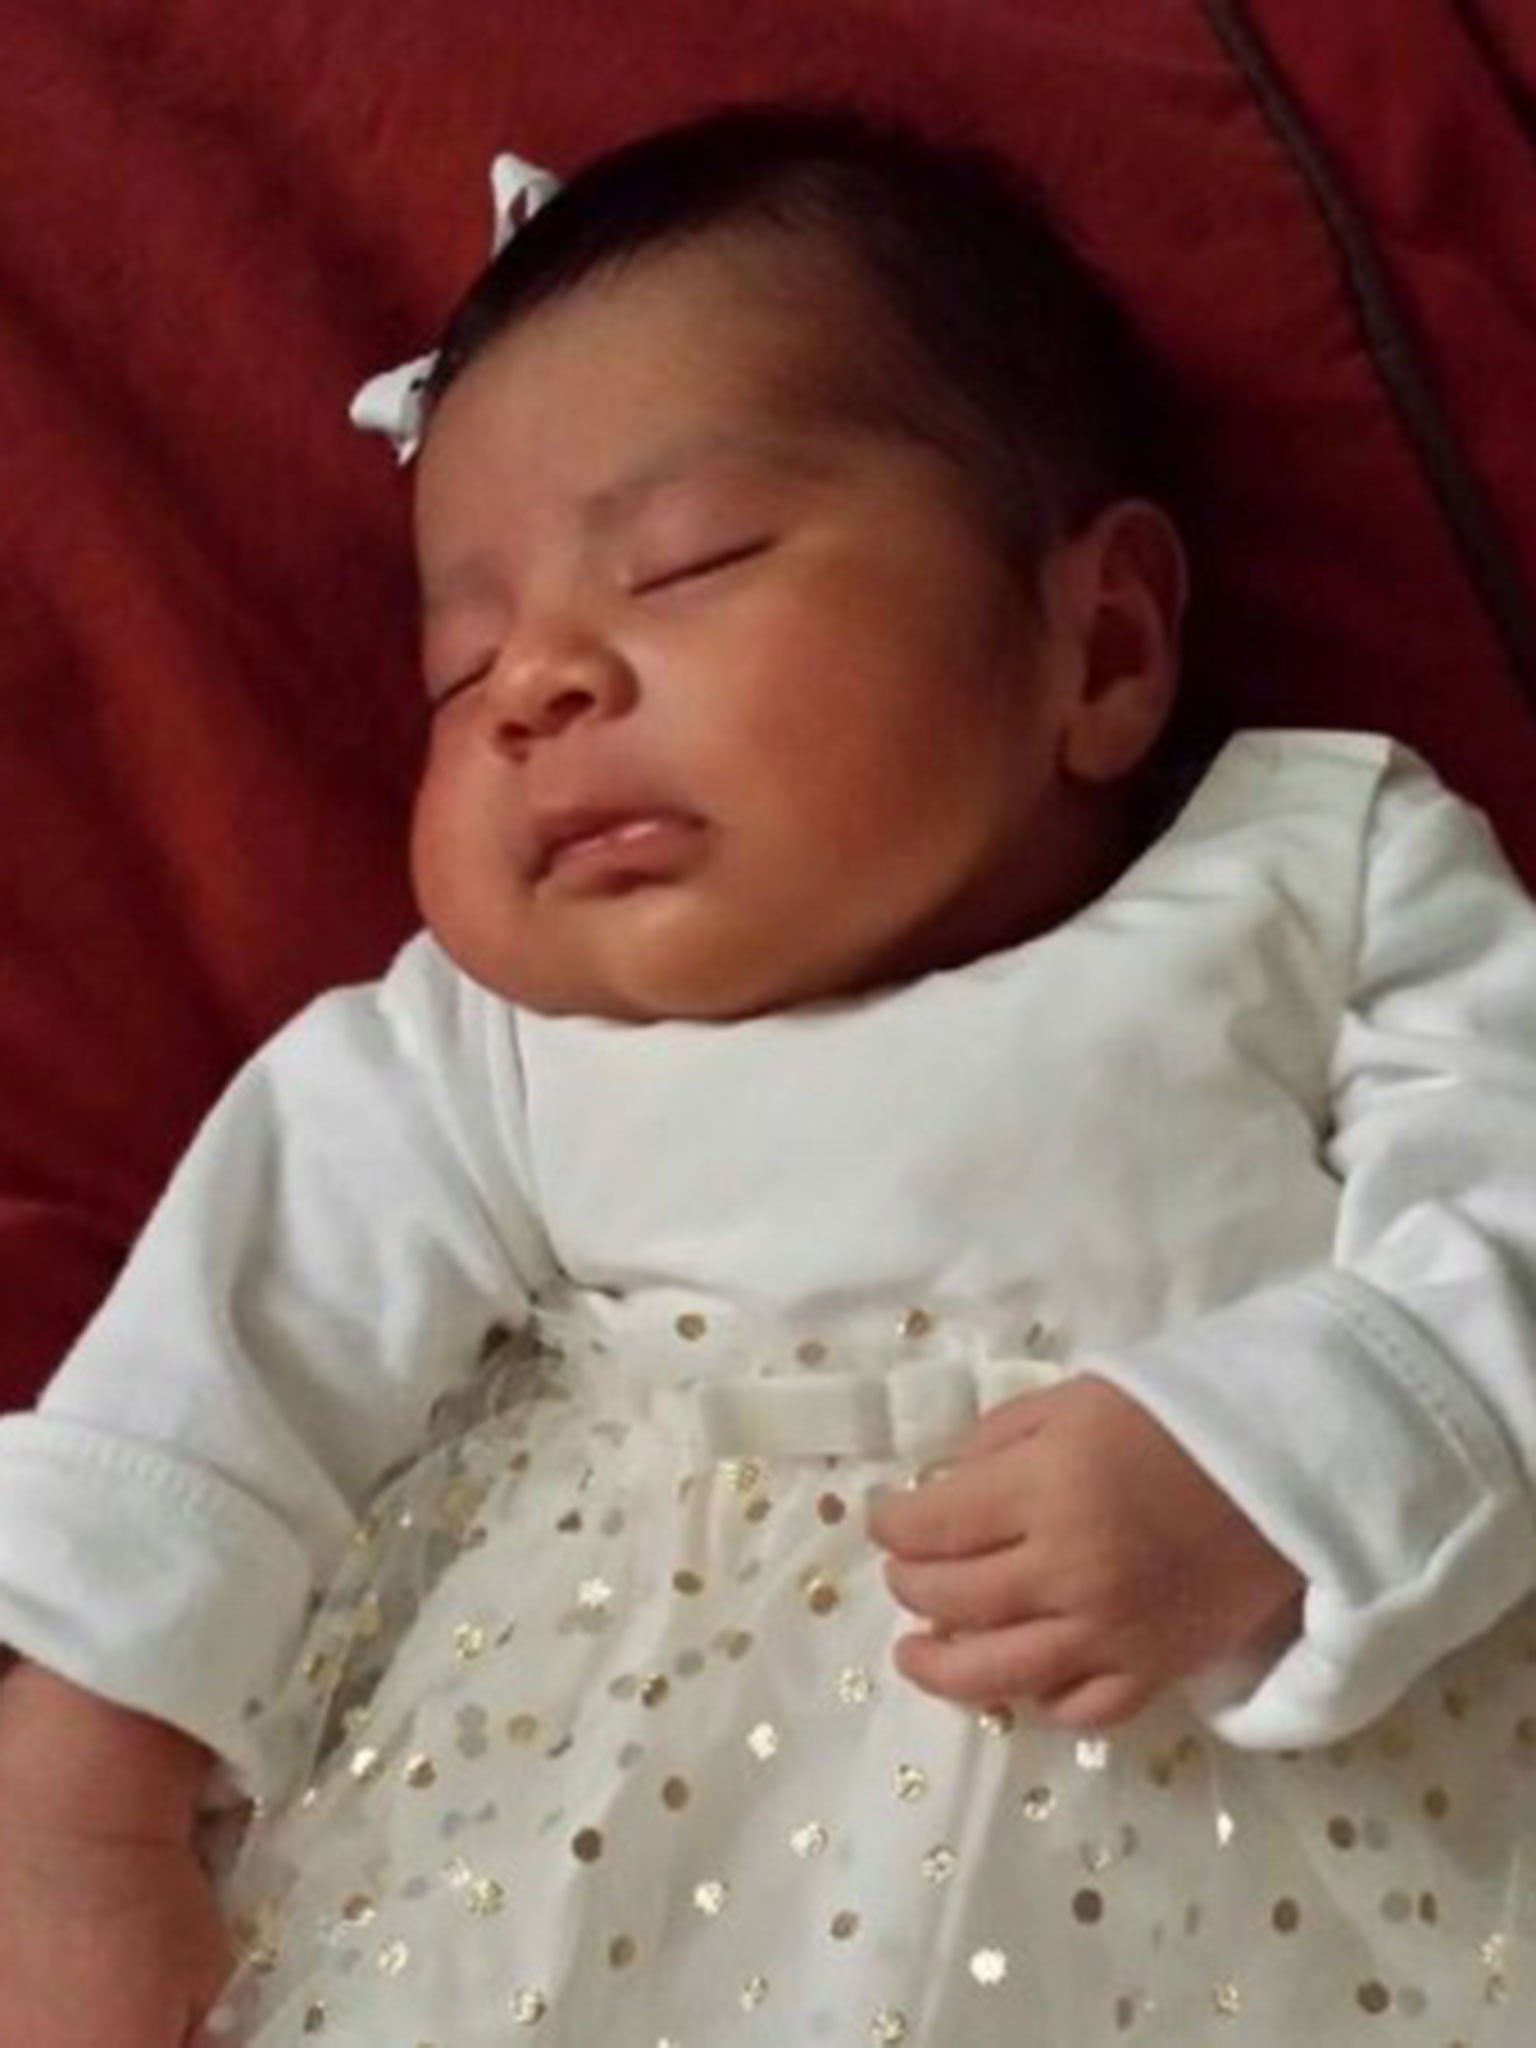 A body found in a Southern California dumpster yesterday has been confirmed as that of three-week-old baby Eliza Delacruz